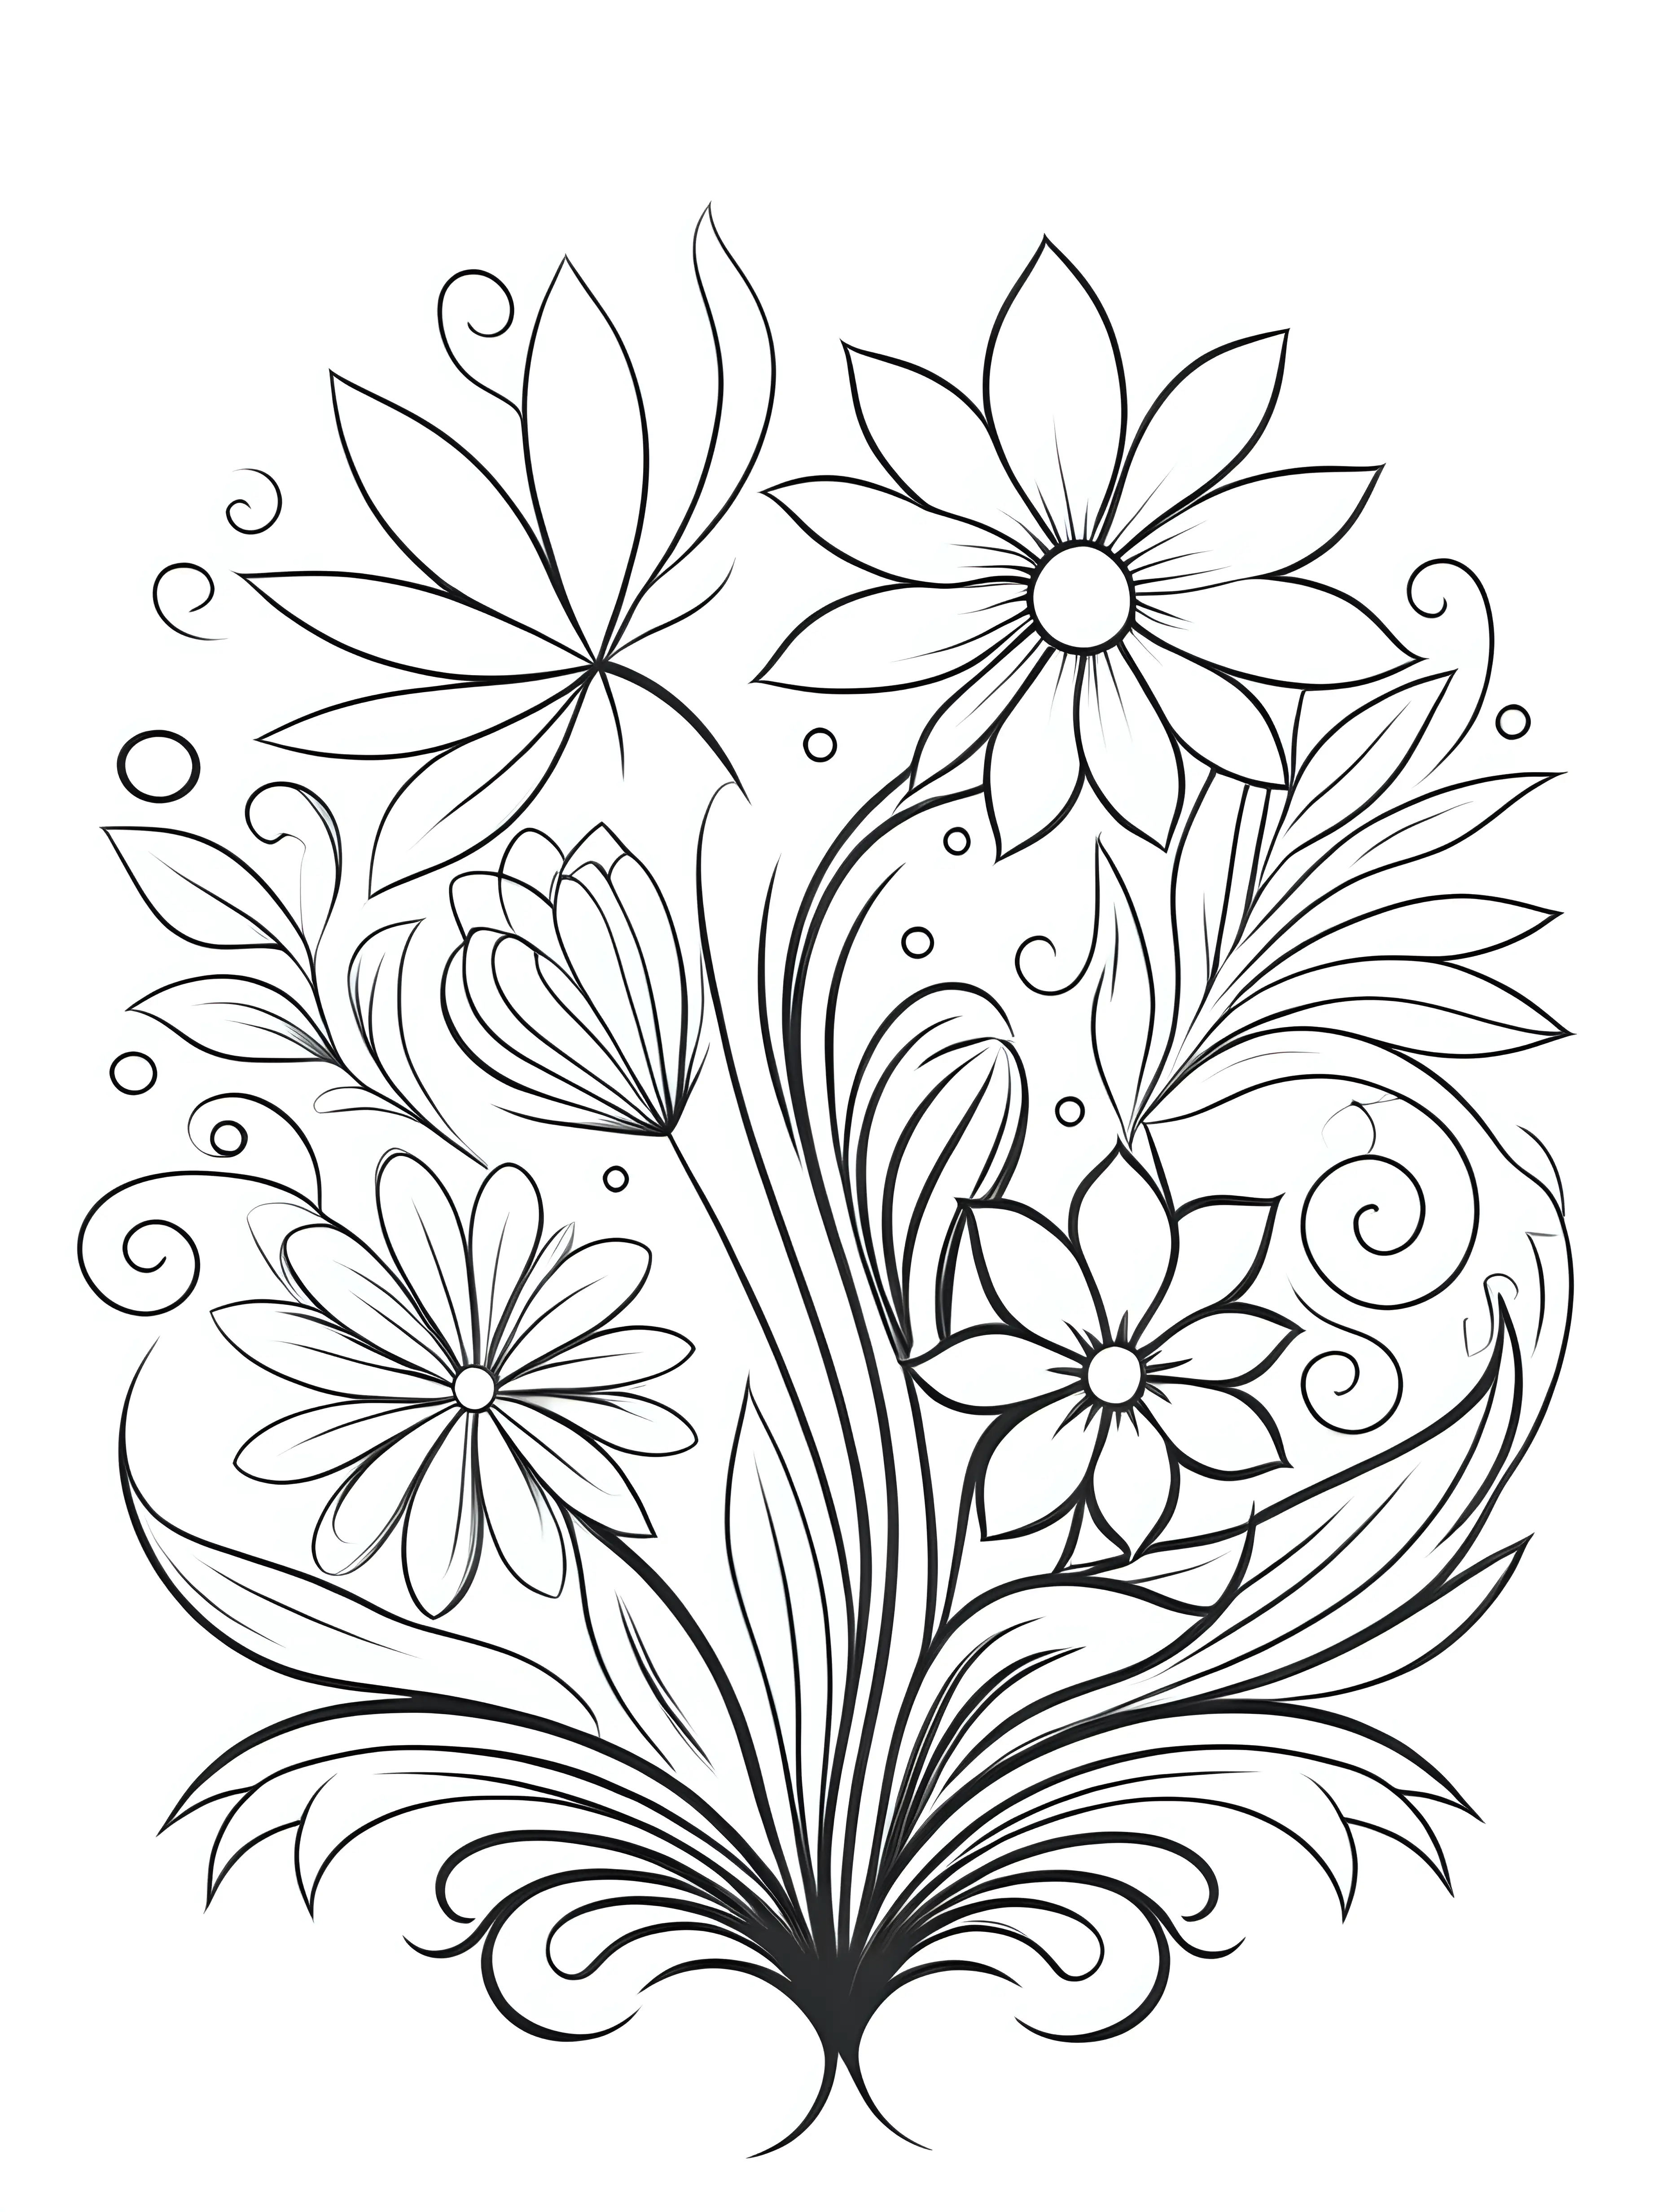 minimalist coloring page, artistic shapes and floral, black and white, white background, no shading, simple design, digital art